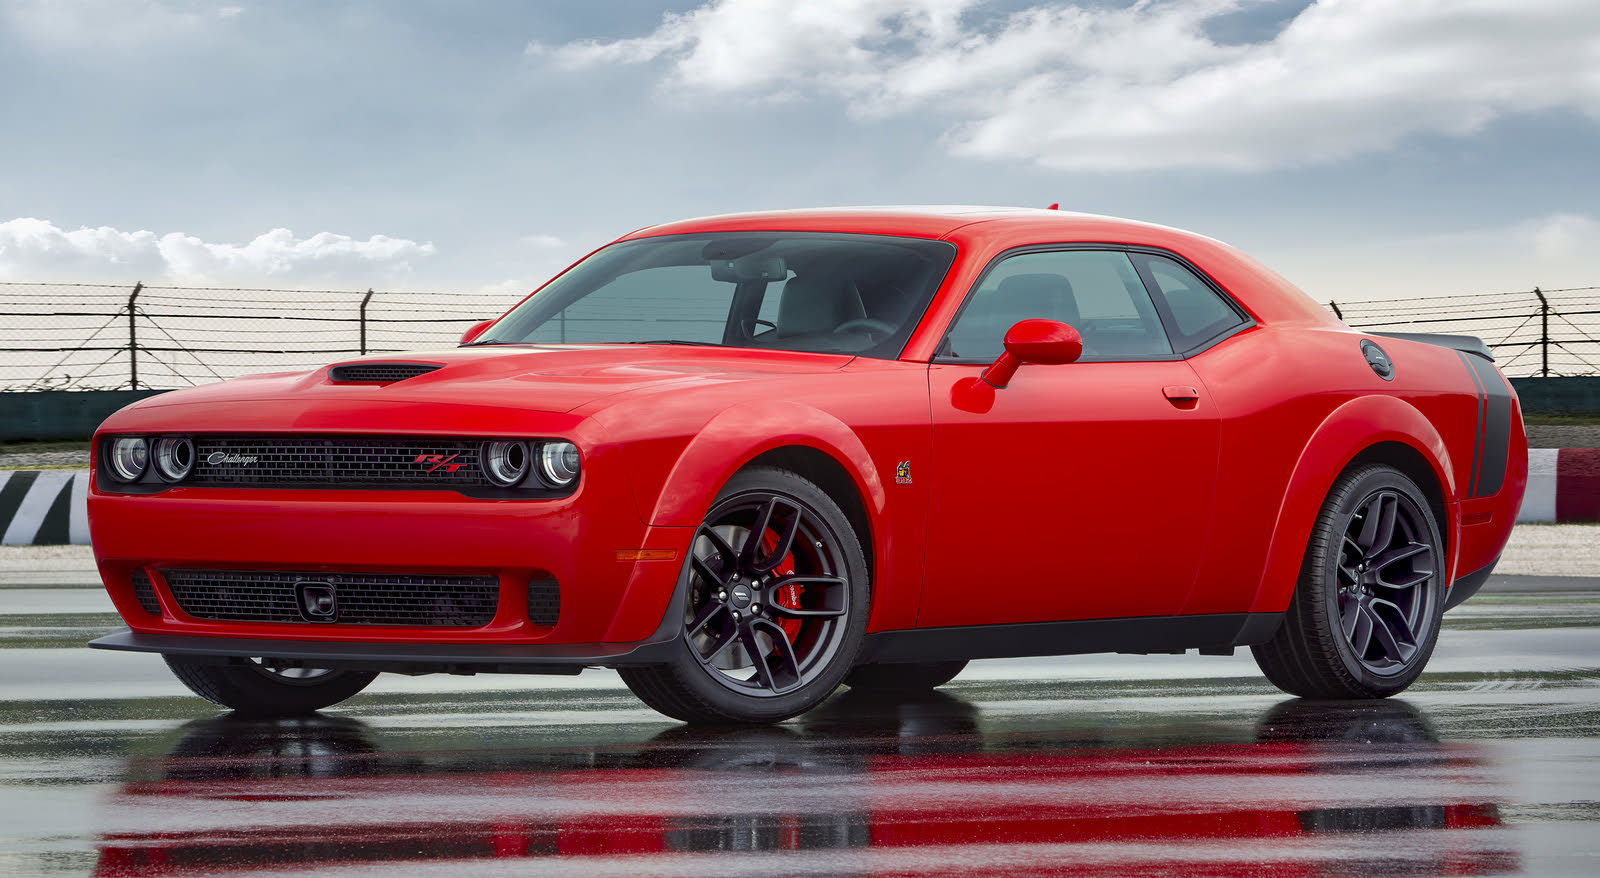 2020 Dodge Challenger: Prices, Reviews & Pictures - CarGurus